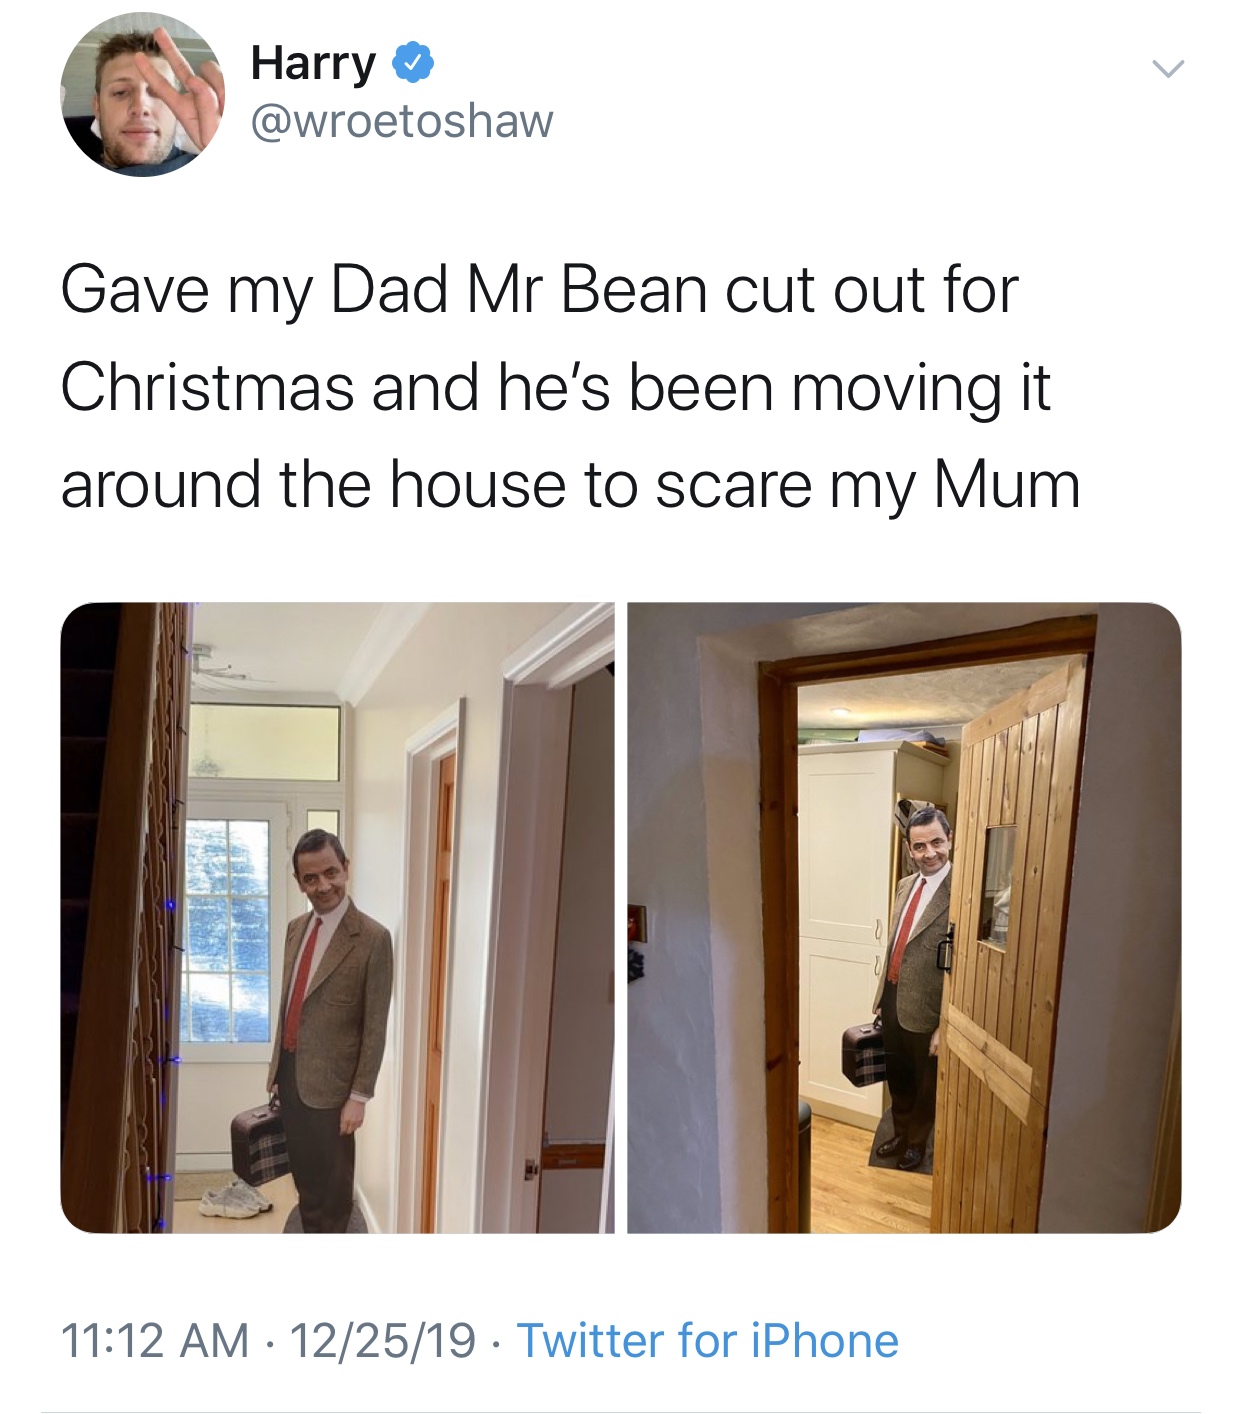 presentation - Harry Gave my Dad Mr Bean cut out for Christmas and he's been moving it around the house to scare my Mum 122519 Twitter for iPhone